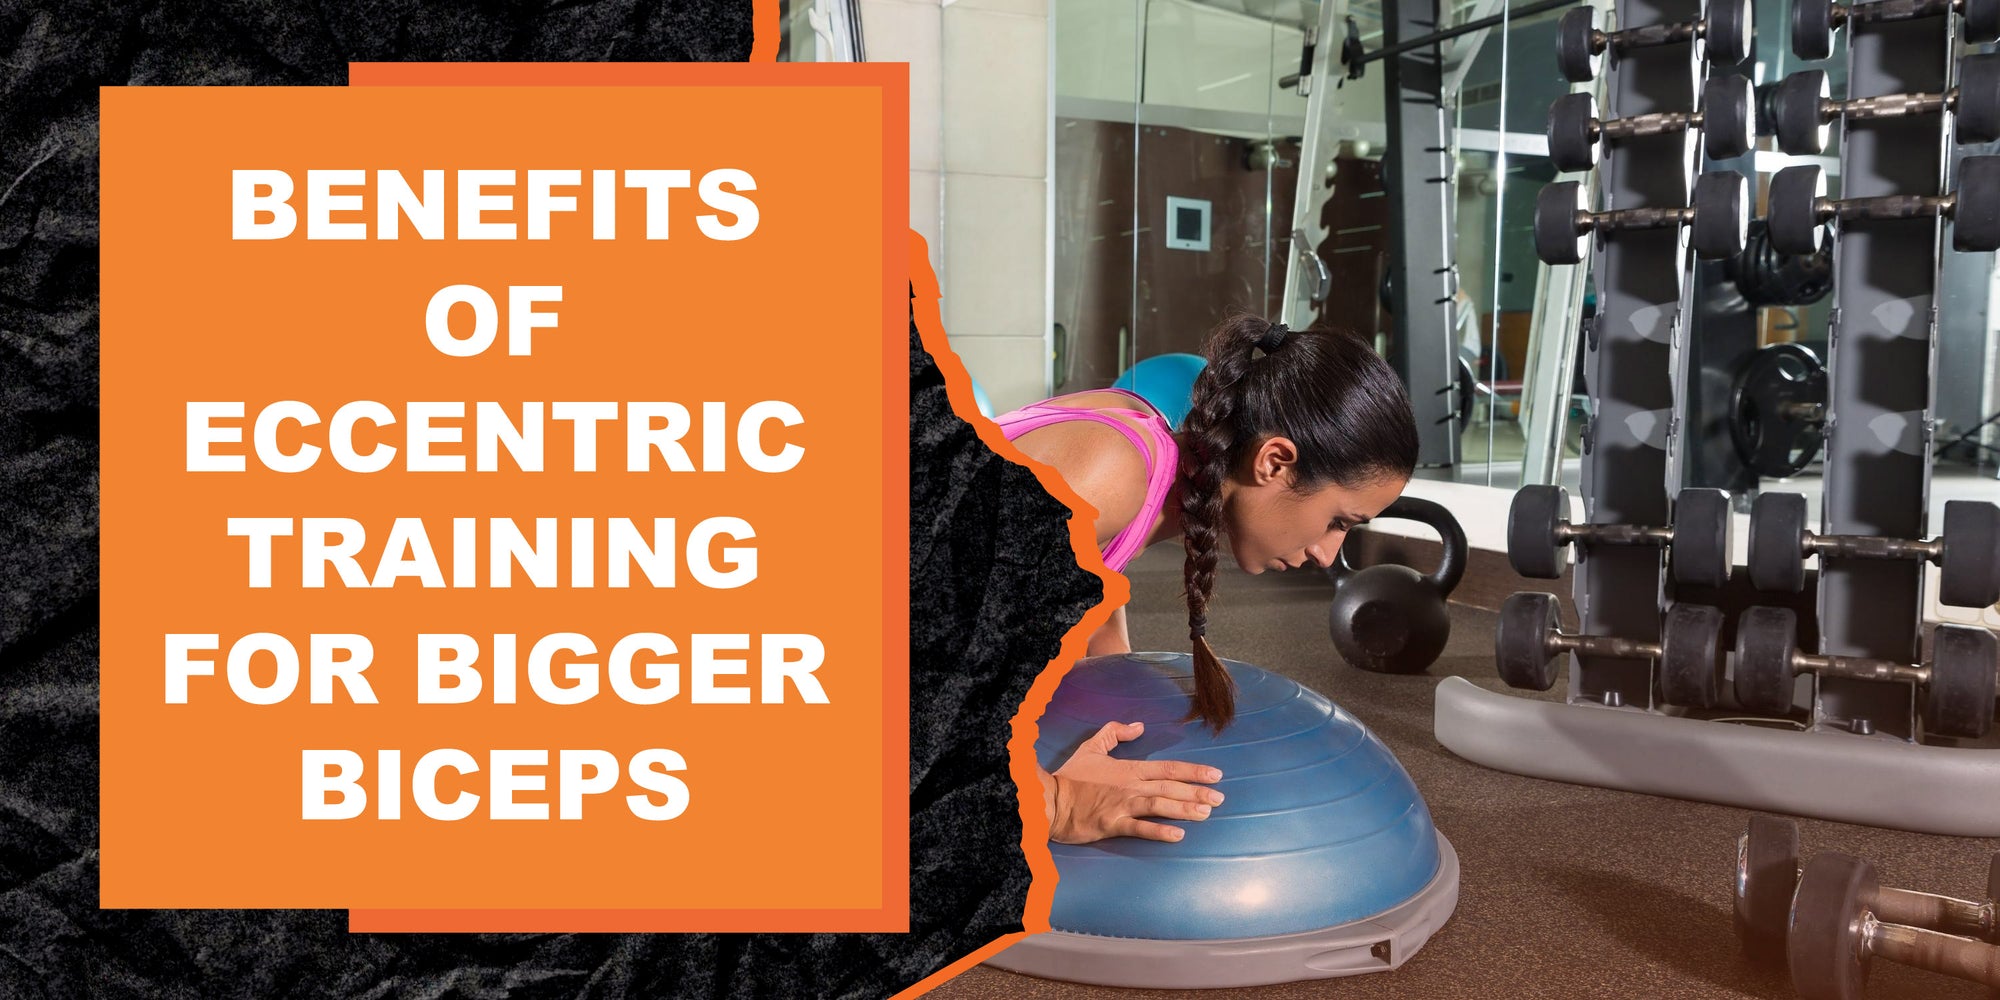 The Benefits of Eccentric Training for Building Bigger Biceps